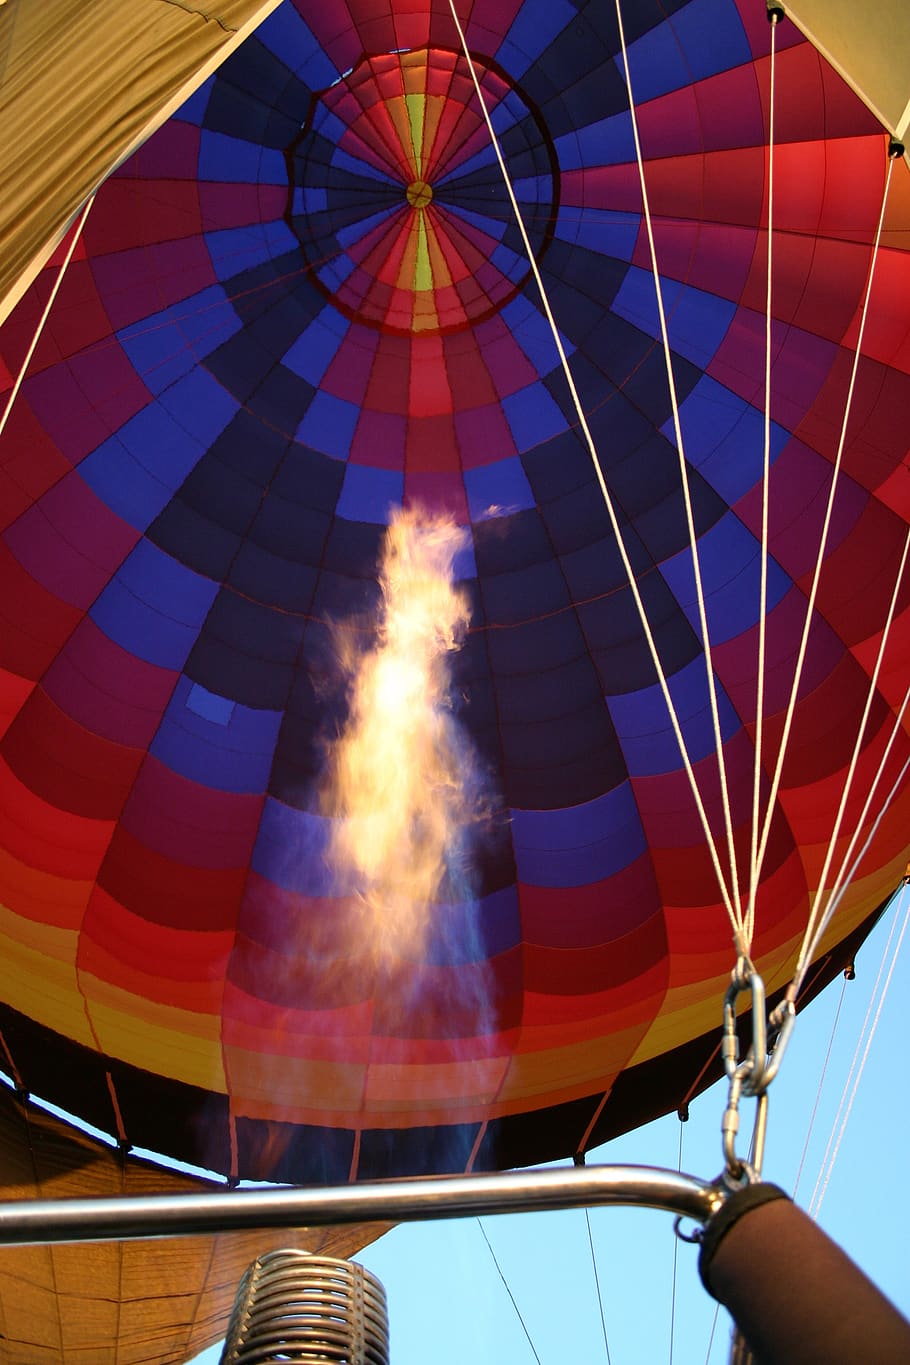 hot air balloon, burner, recreation, glow, hot, flight, colorful, fly, flame, basket